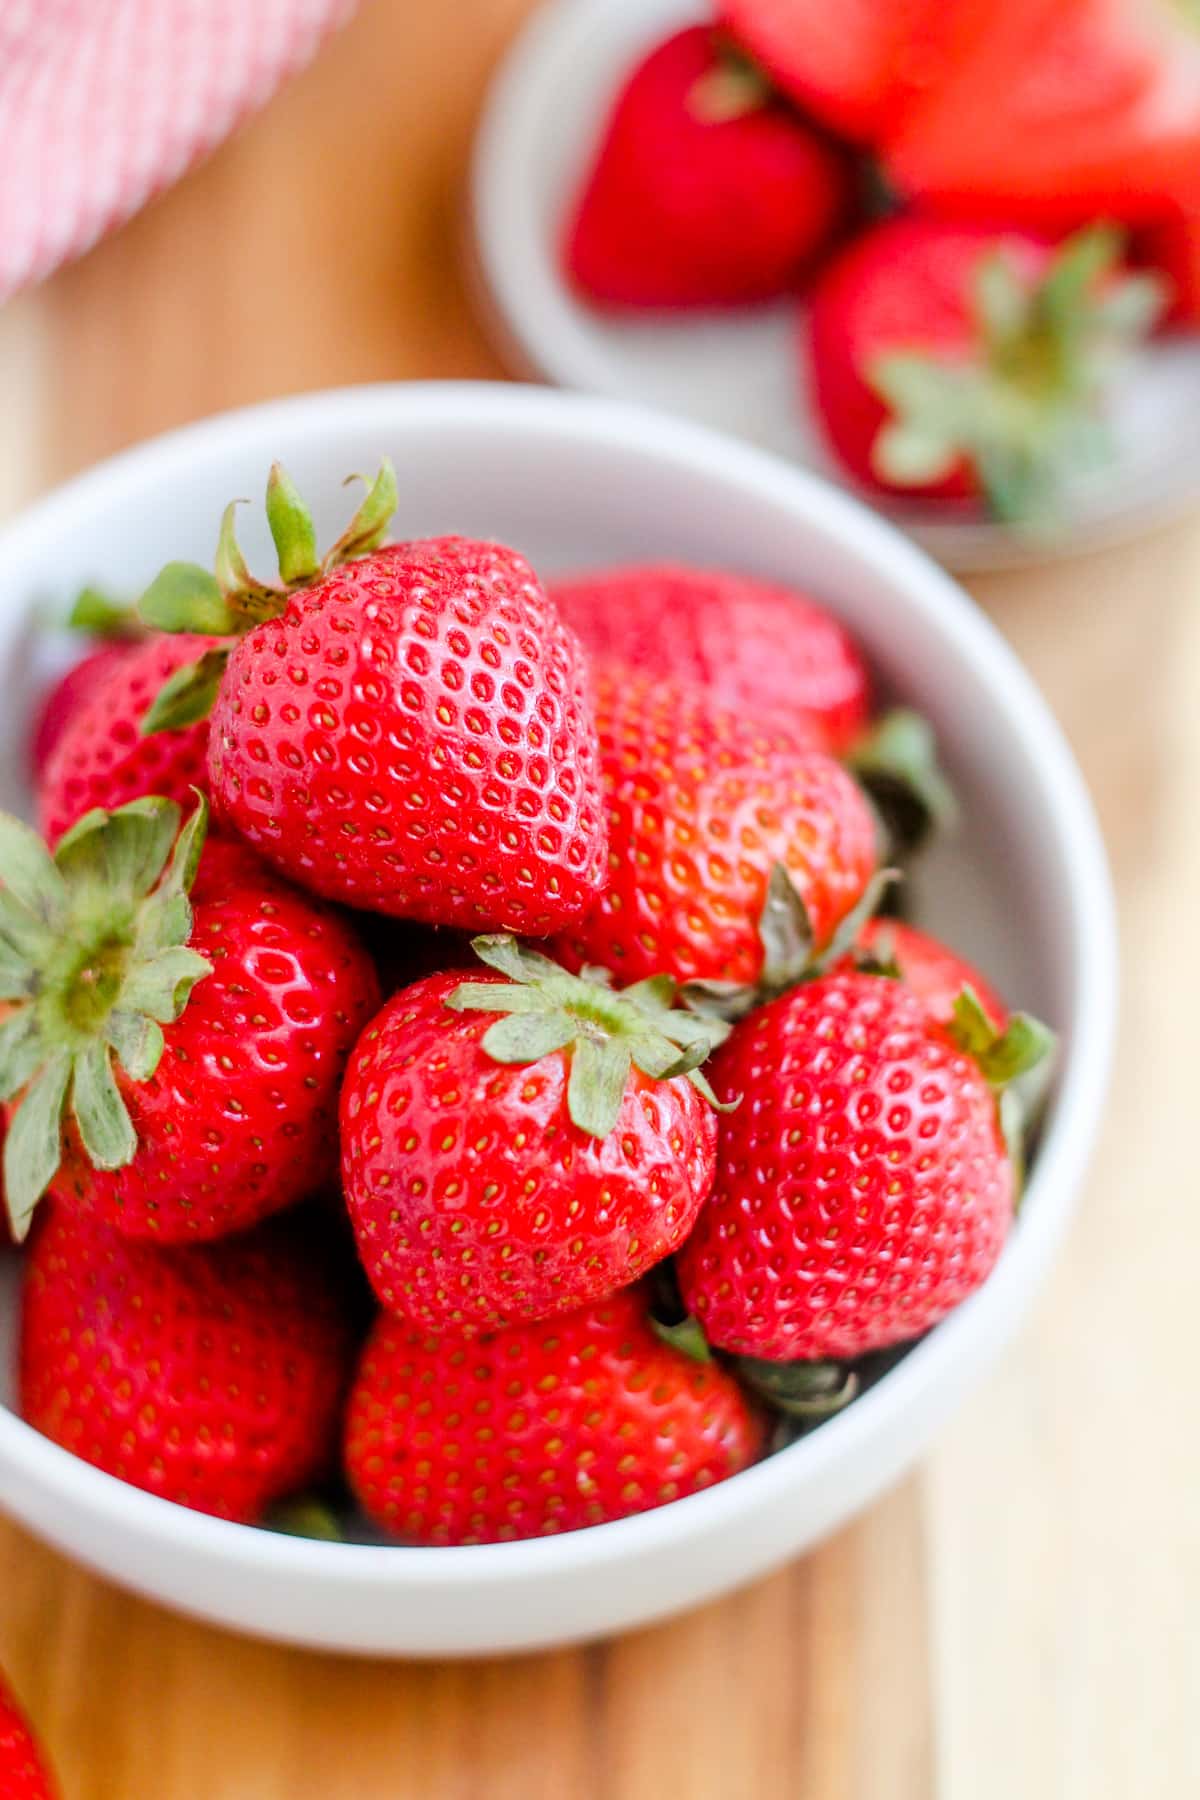 A bowl of strawberries.